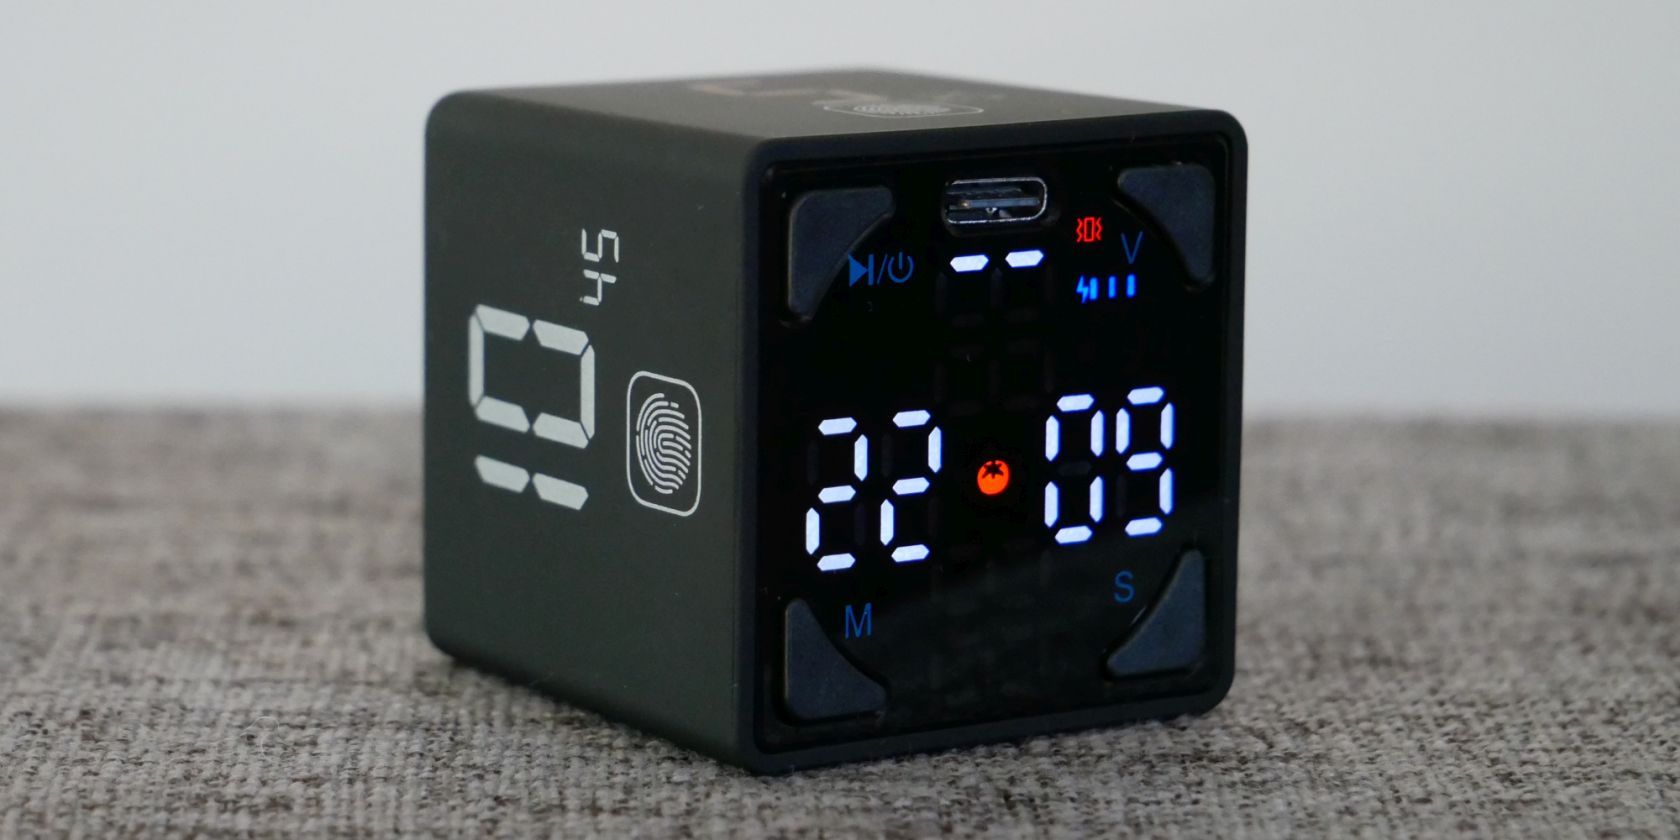 Ticktime Cube: Flip to Start Countdown & Manage Your Time